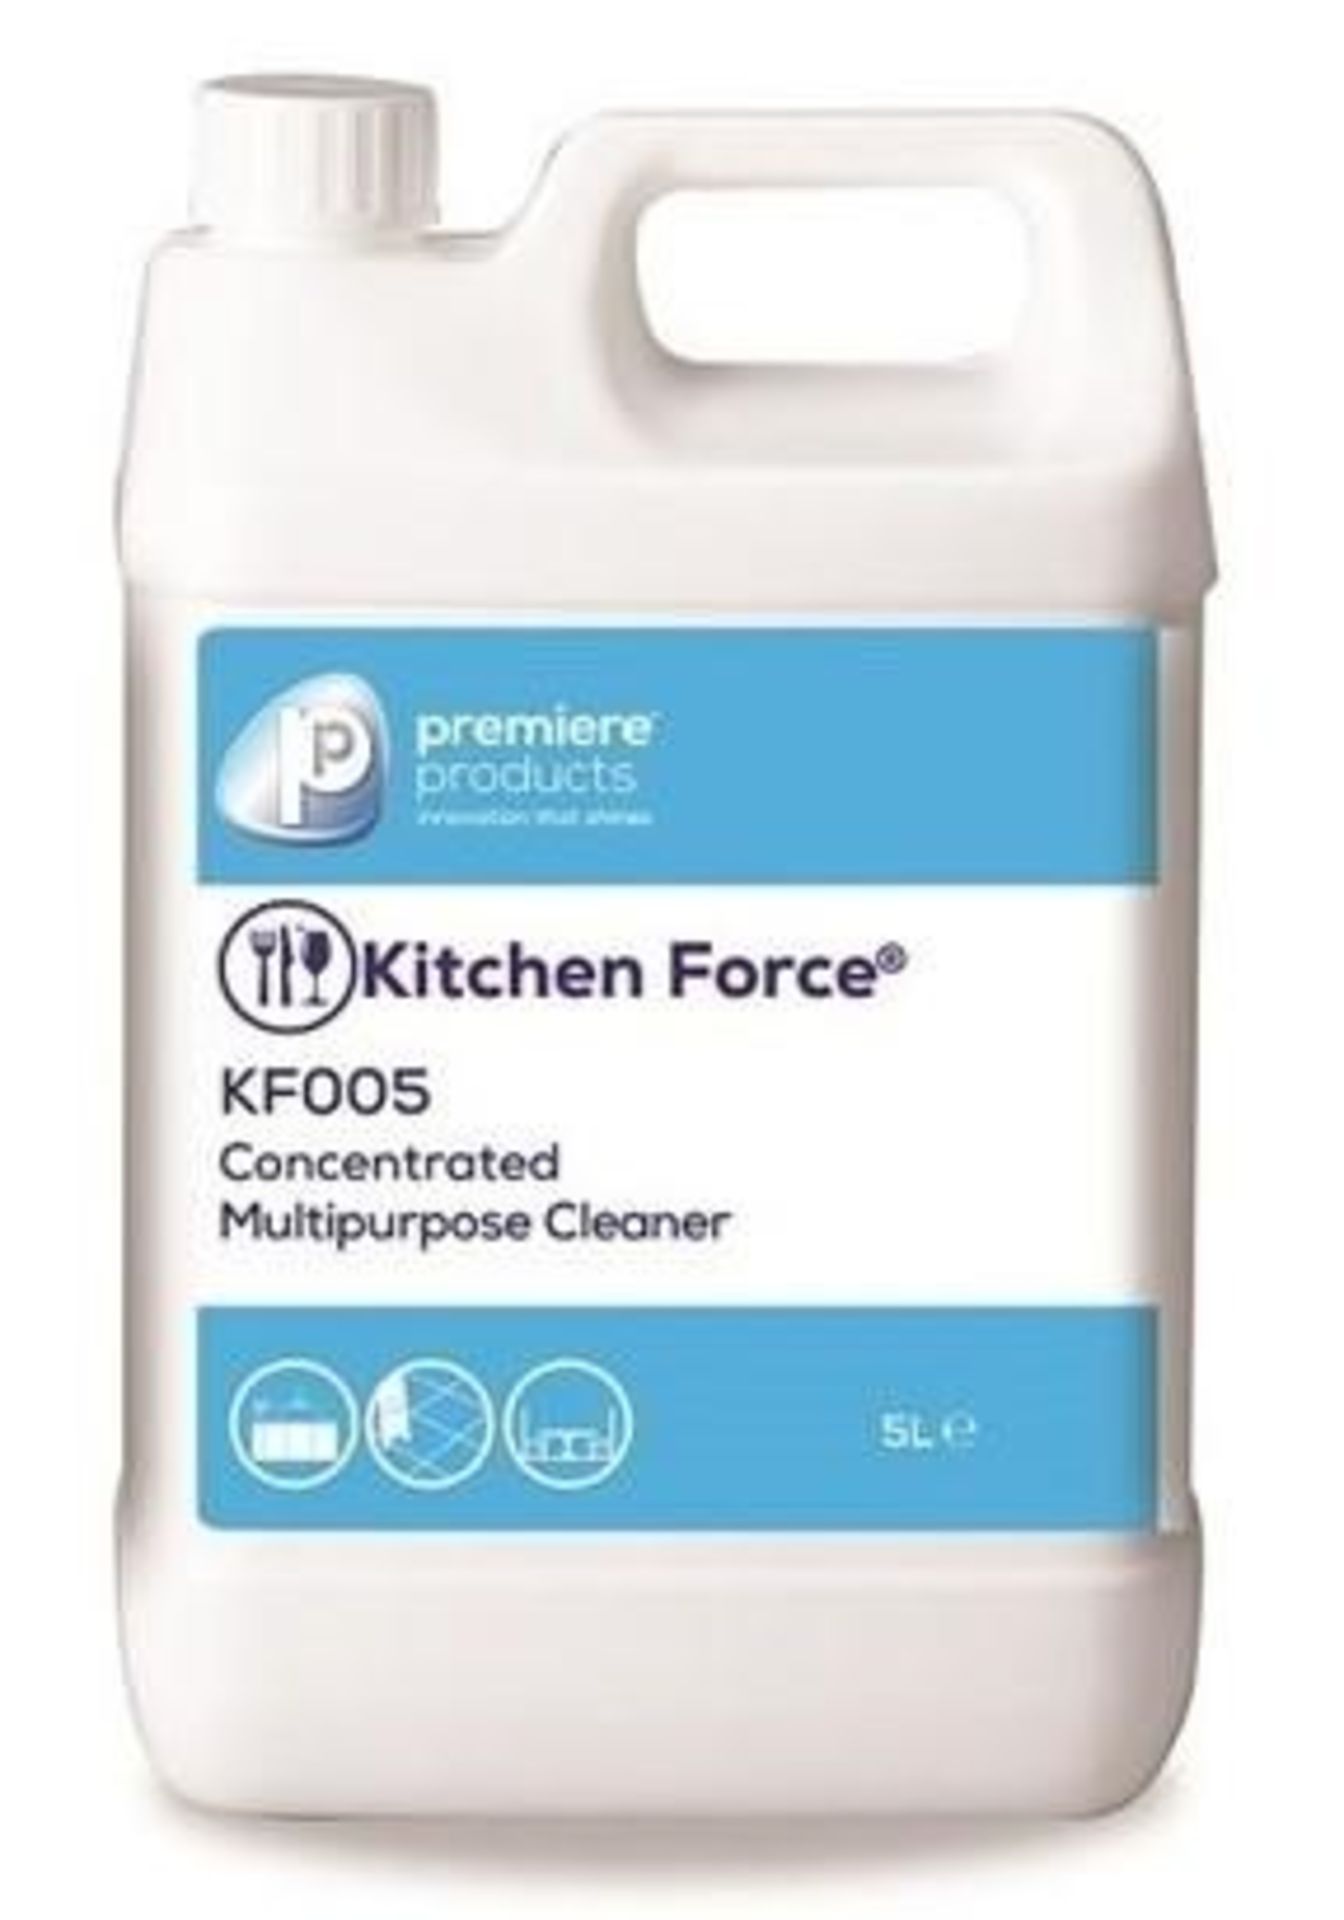 2 x Kitchen Force 5 Litre Concentrated Multipurpose Cleaner - Premiere Products - Includes 2 x 5